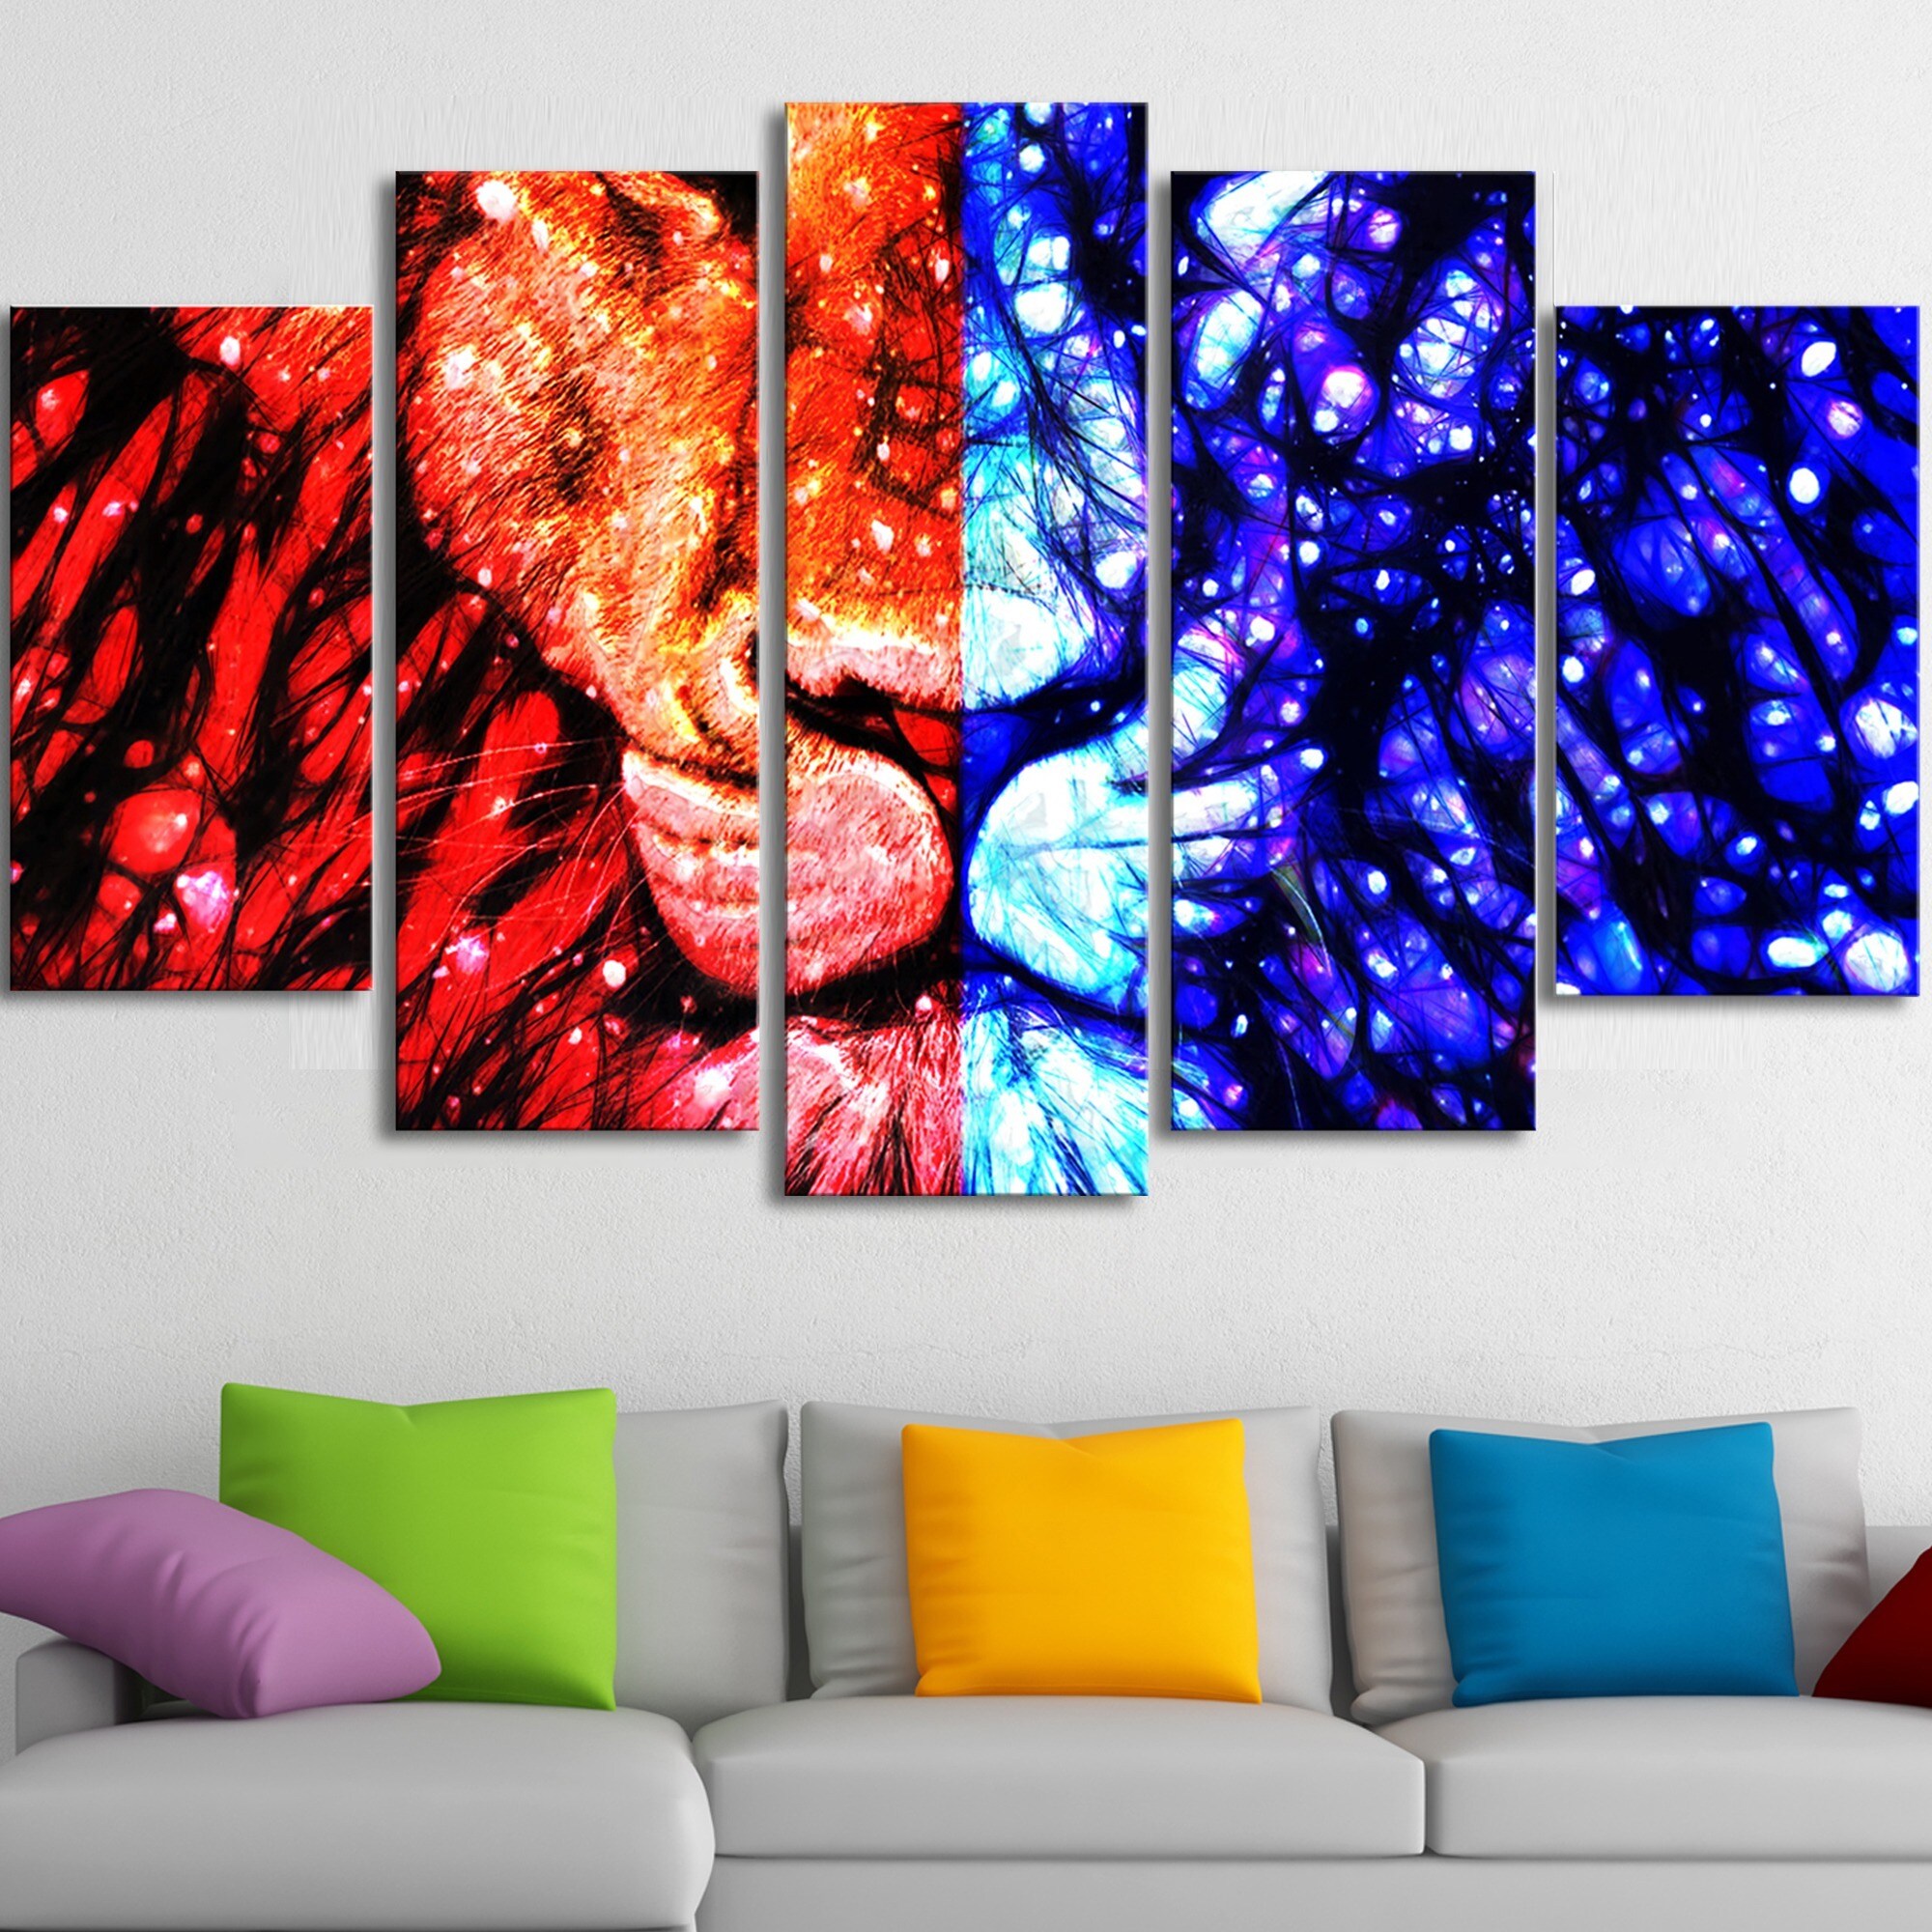 Shop King Of The Jungle Canvas Wall Art Overstock 9692011 60 In Wide X 32 In High 5 Panels Diamond Shape